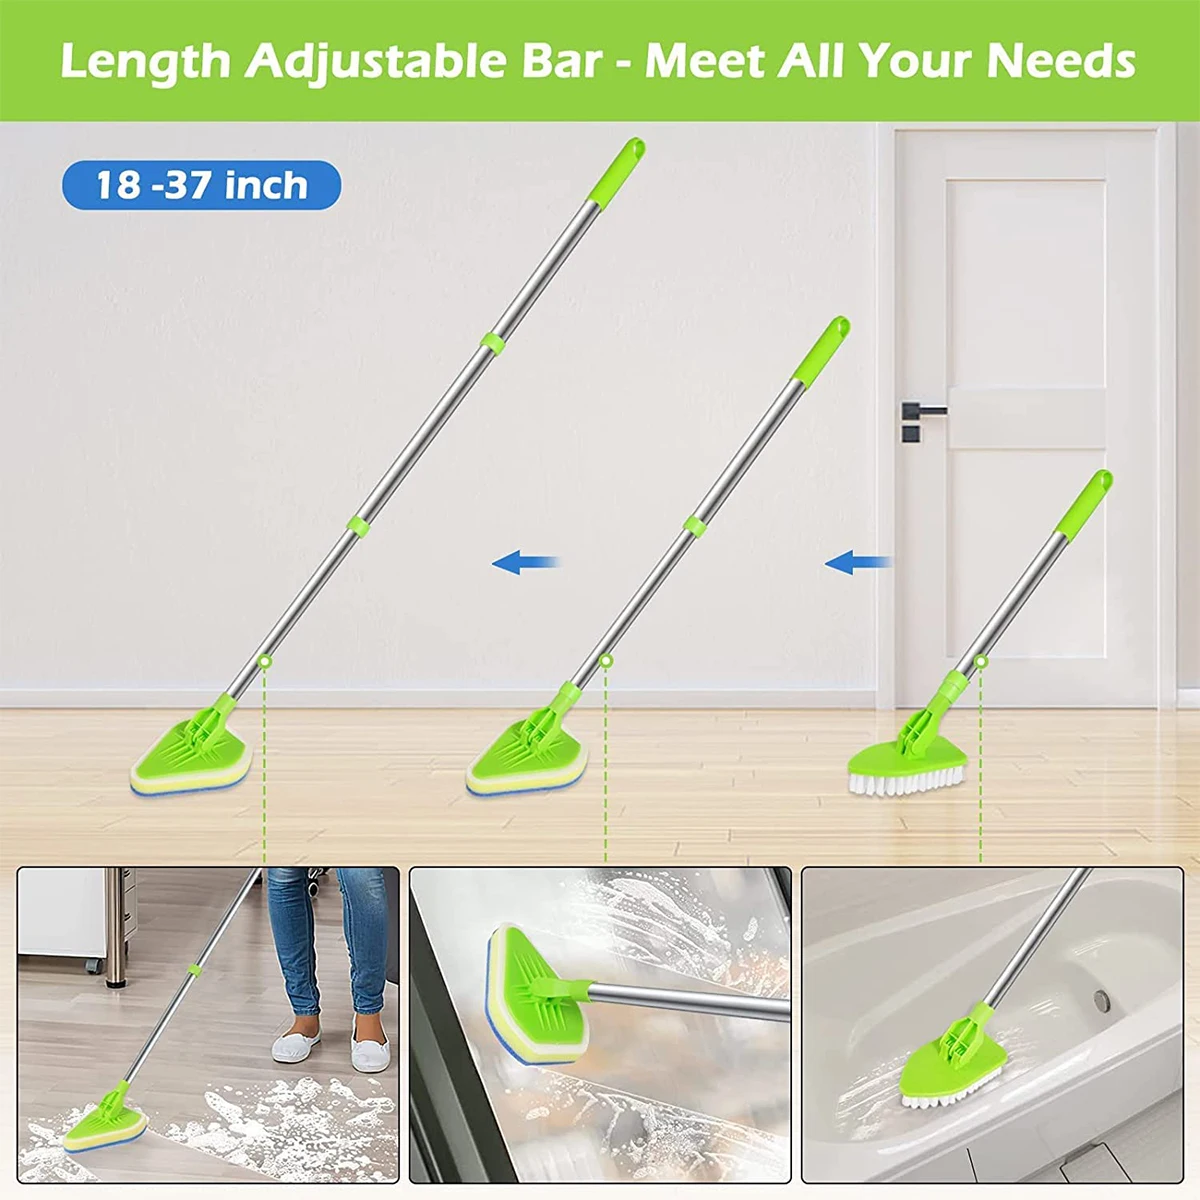 https://ae01.alicdn.com/kf/S4549dc7004af4e579da22e77ff67a249Z/NEW-Scrub-Cleaning-Brush-with-Long-Handle-3-in-1-Shower-Cleaning-Brush-Tub-Tile-Scrubber.jpg